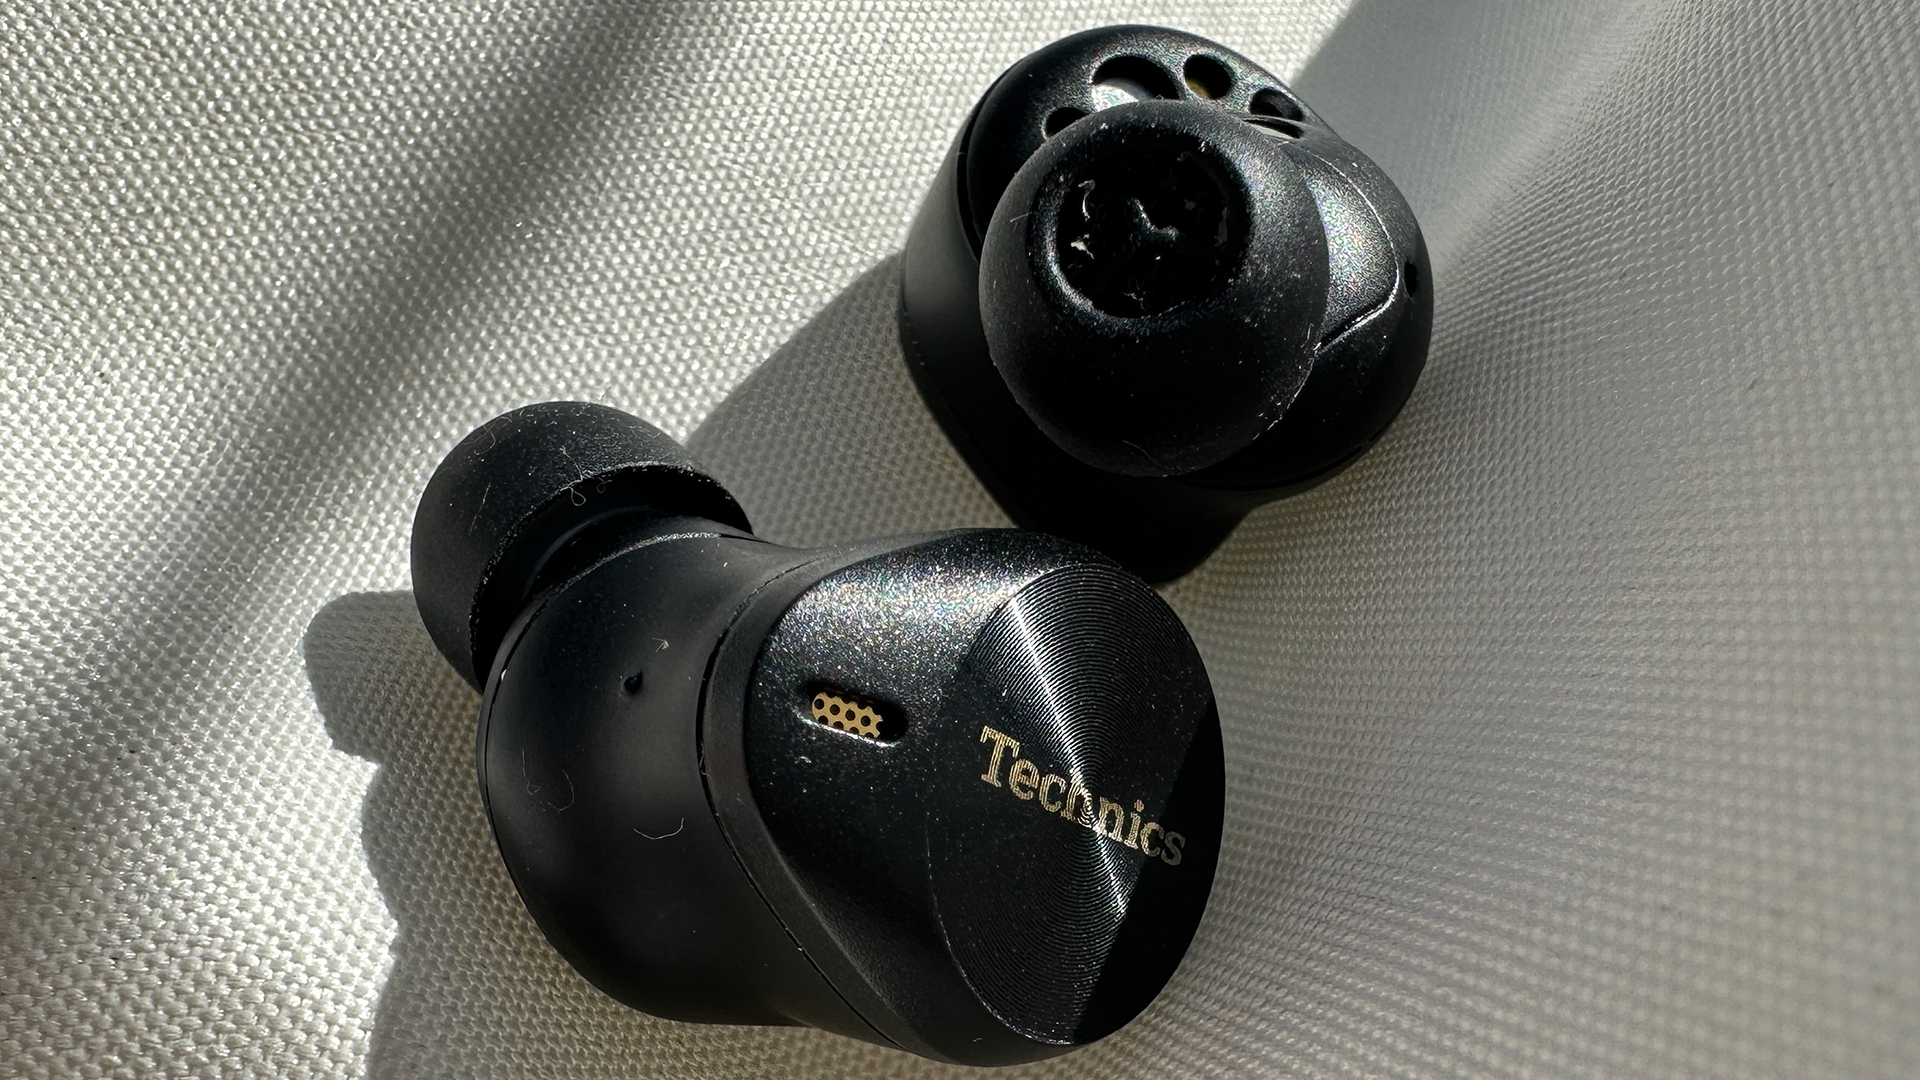 The Technics EAHAZ80 earbuds one facing up and the other down